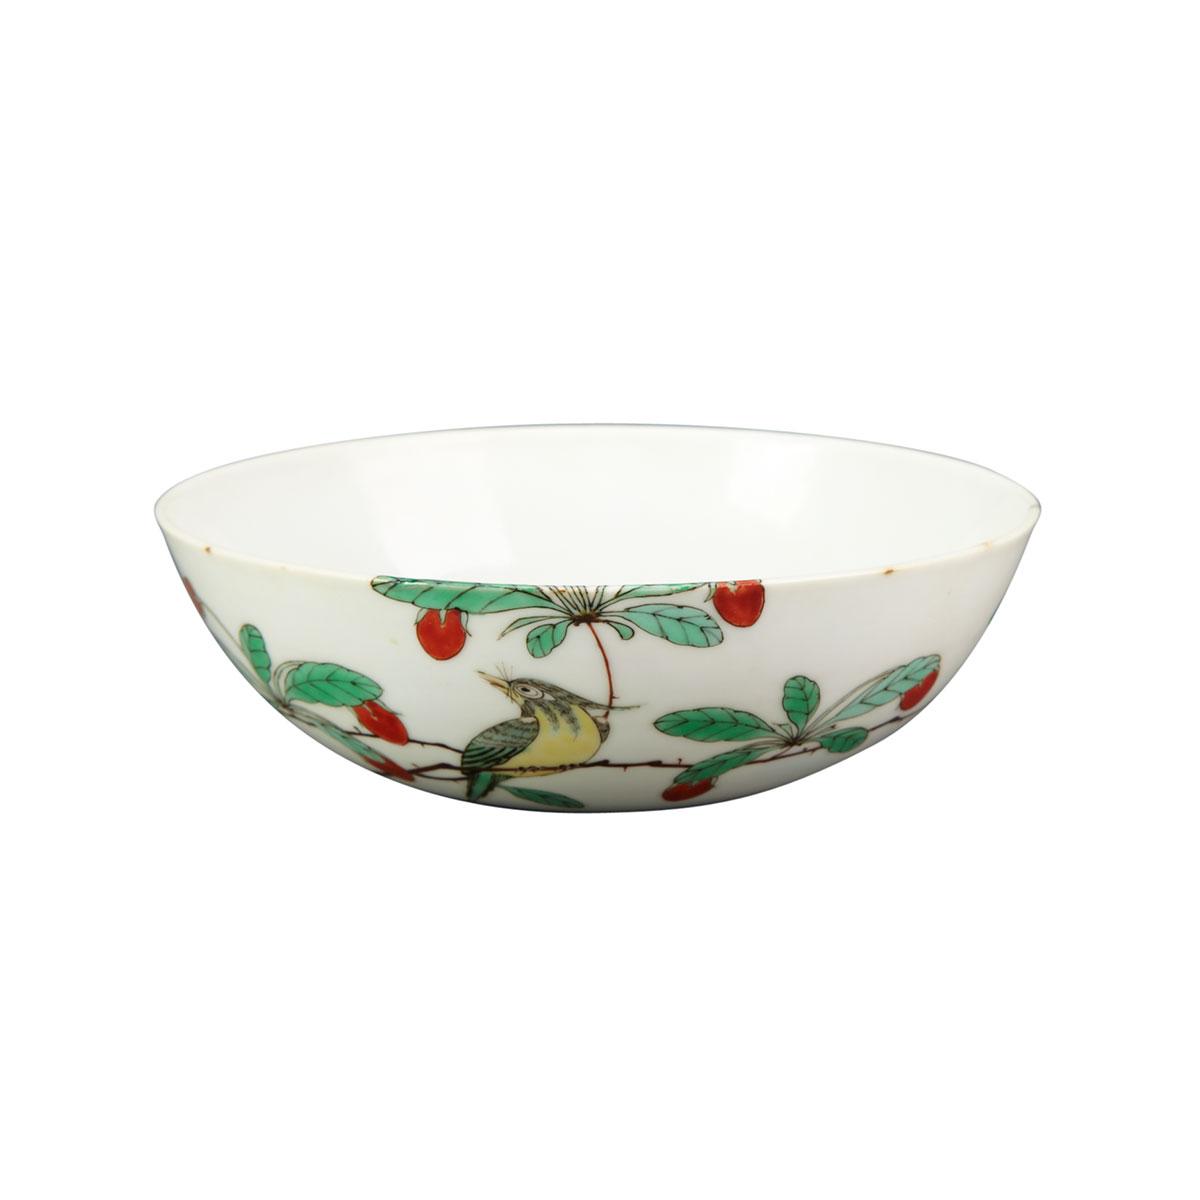 Extremely Rare Famille Verte Bowl, Kangxi Mark and Period (1664-1722)